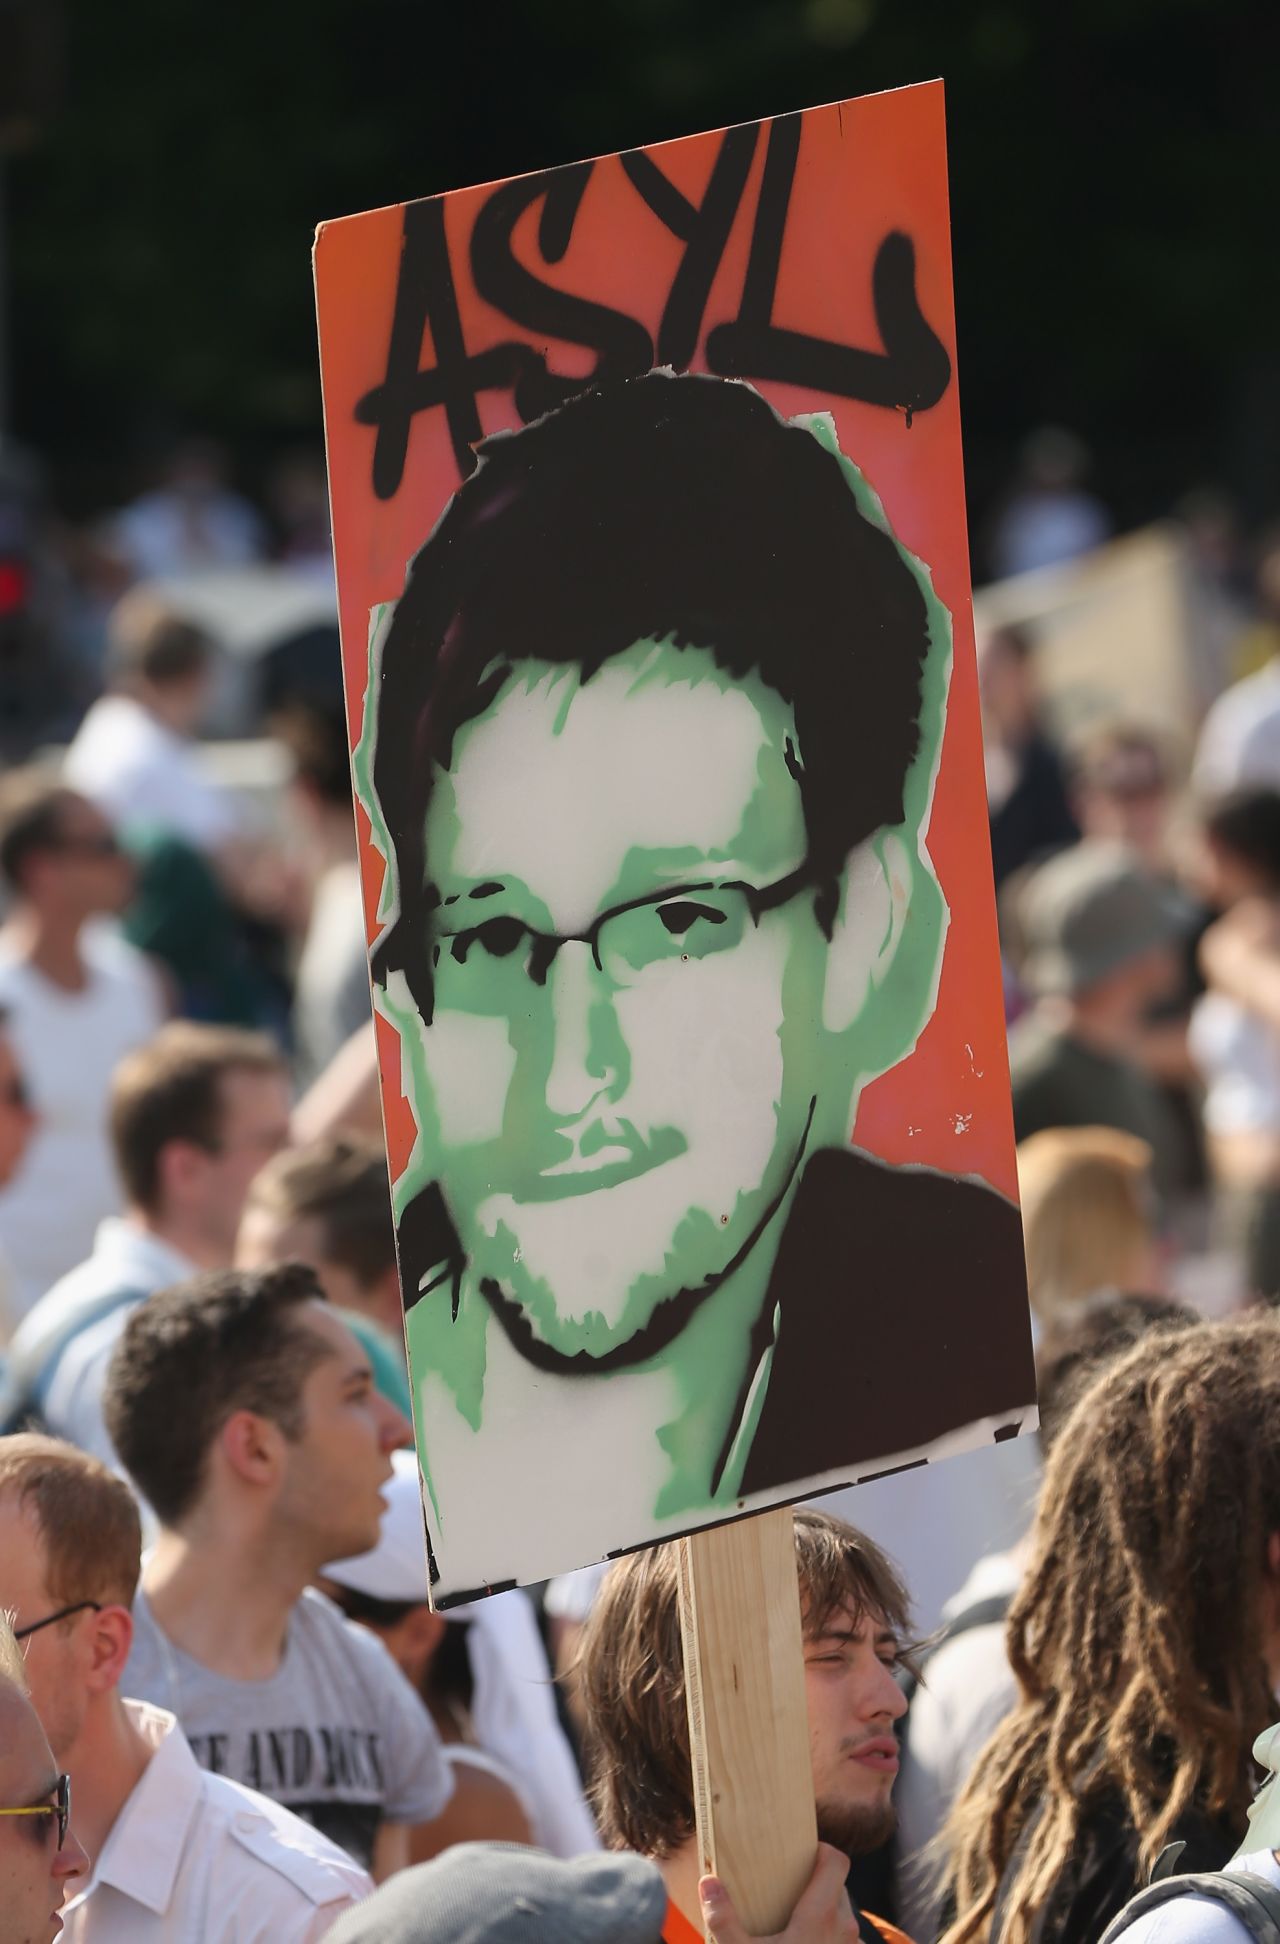 Edward Snowden revealed a flood of classified documents and surveillance data taken from U.S. agencies earlier this year -- raising fears around how much personal information is gathered.  Snowden is wanted in the U.S. on espionage charges but has been on a one-year visa in Russia since June. 